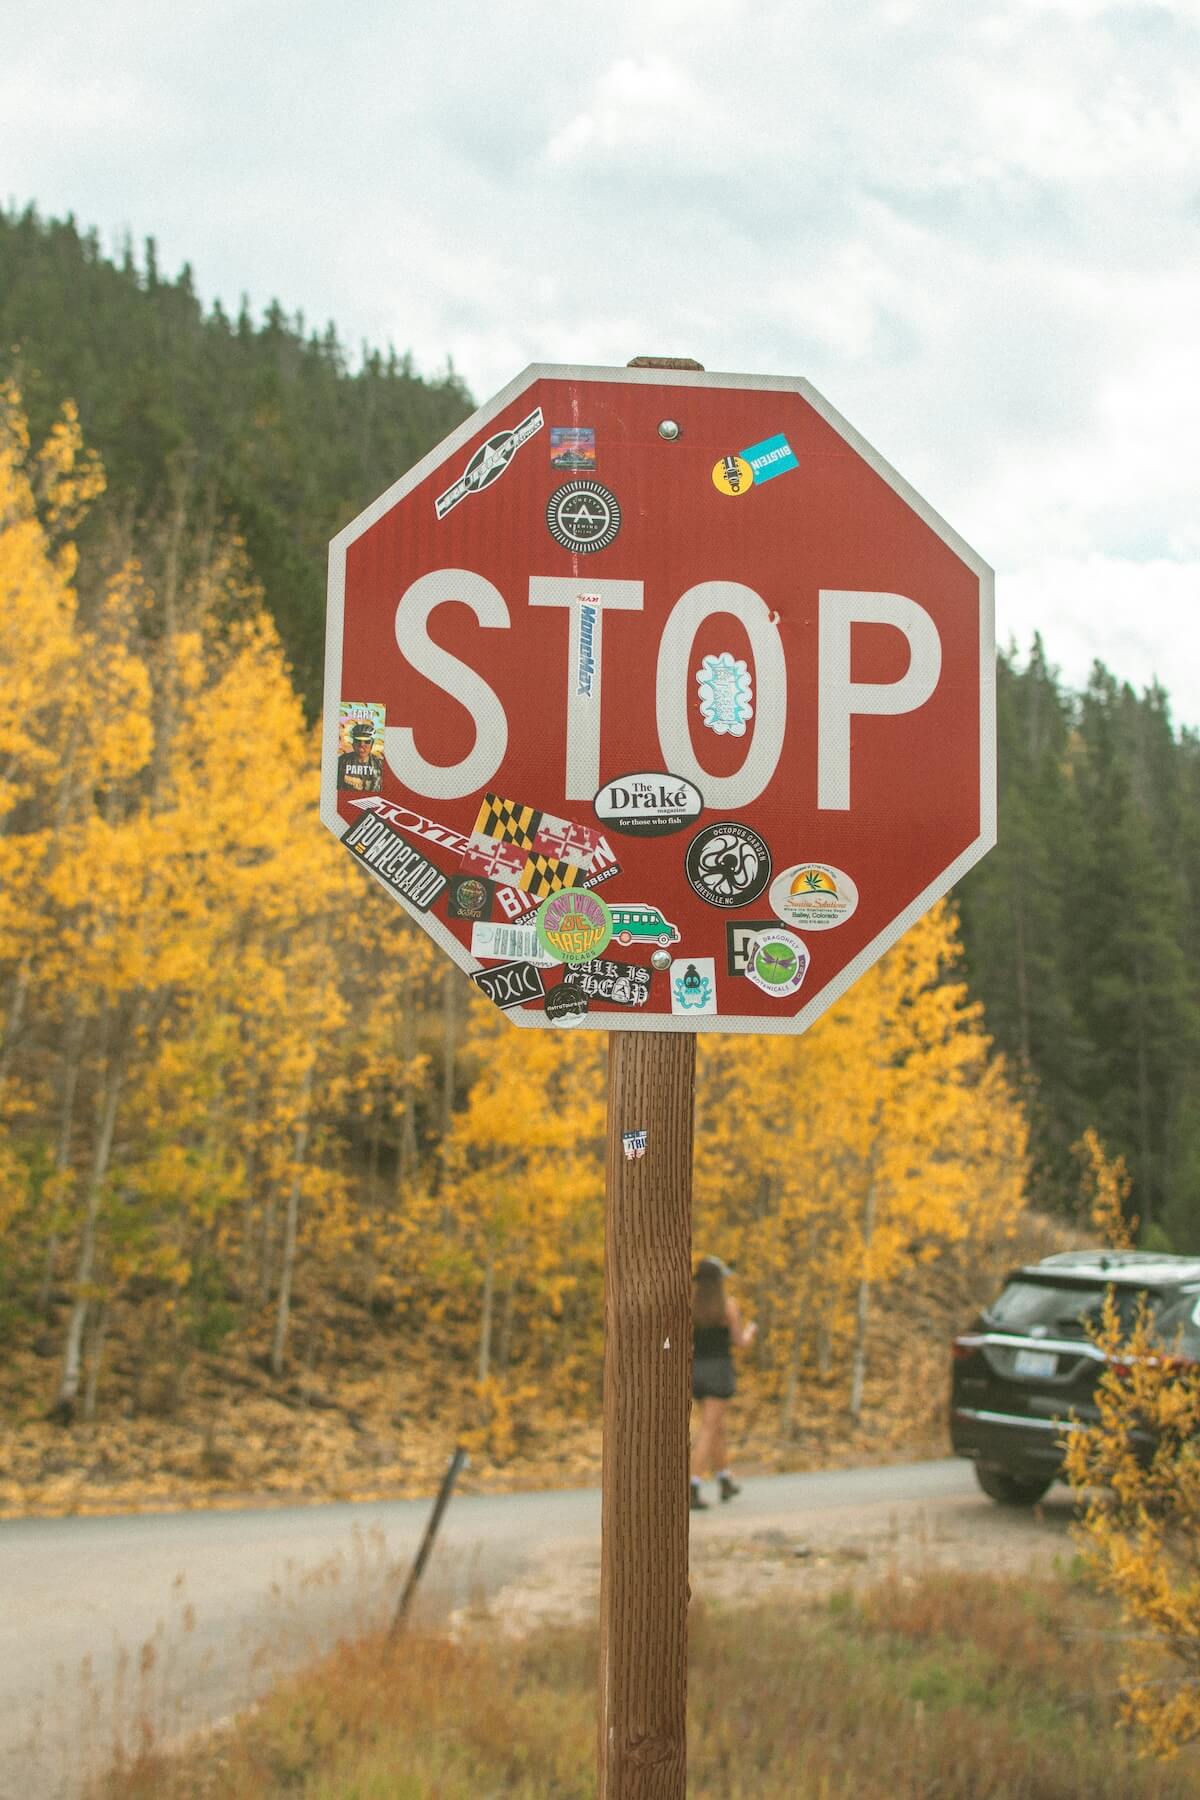 Stop sign in breckenridge. Drive safely!